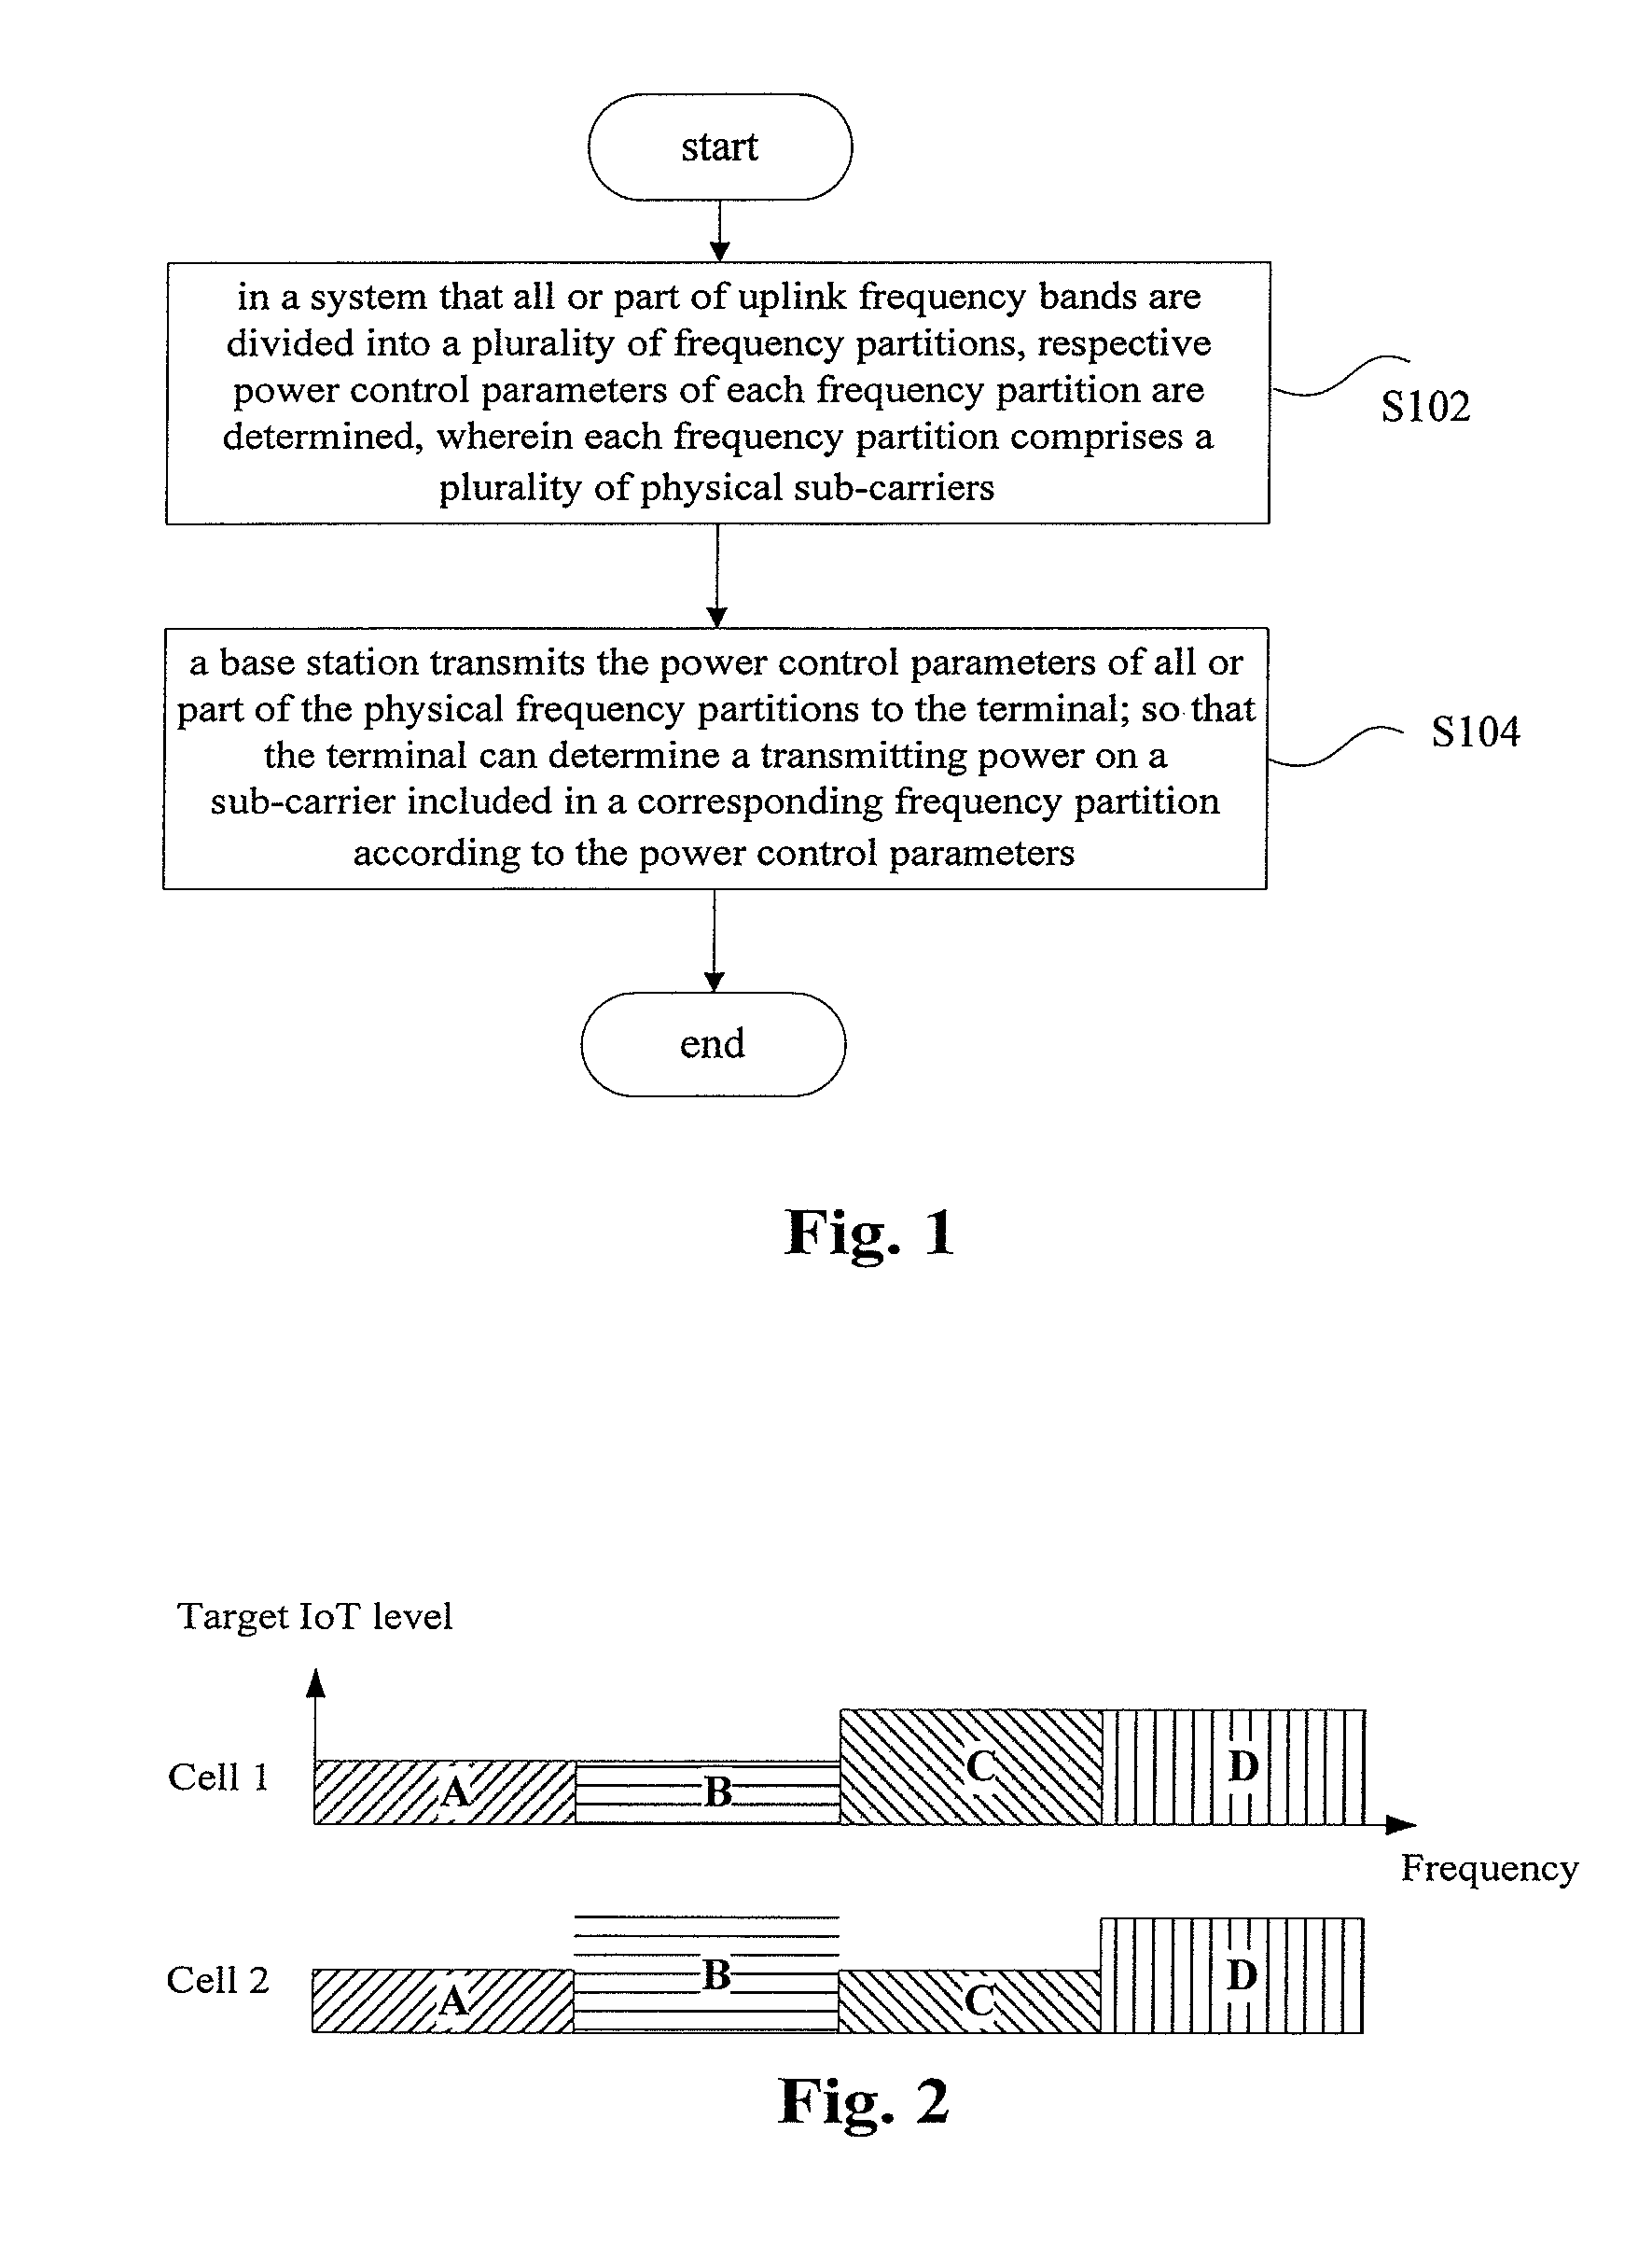 Method and system for controlling an uplink transmitting power, and a base station